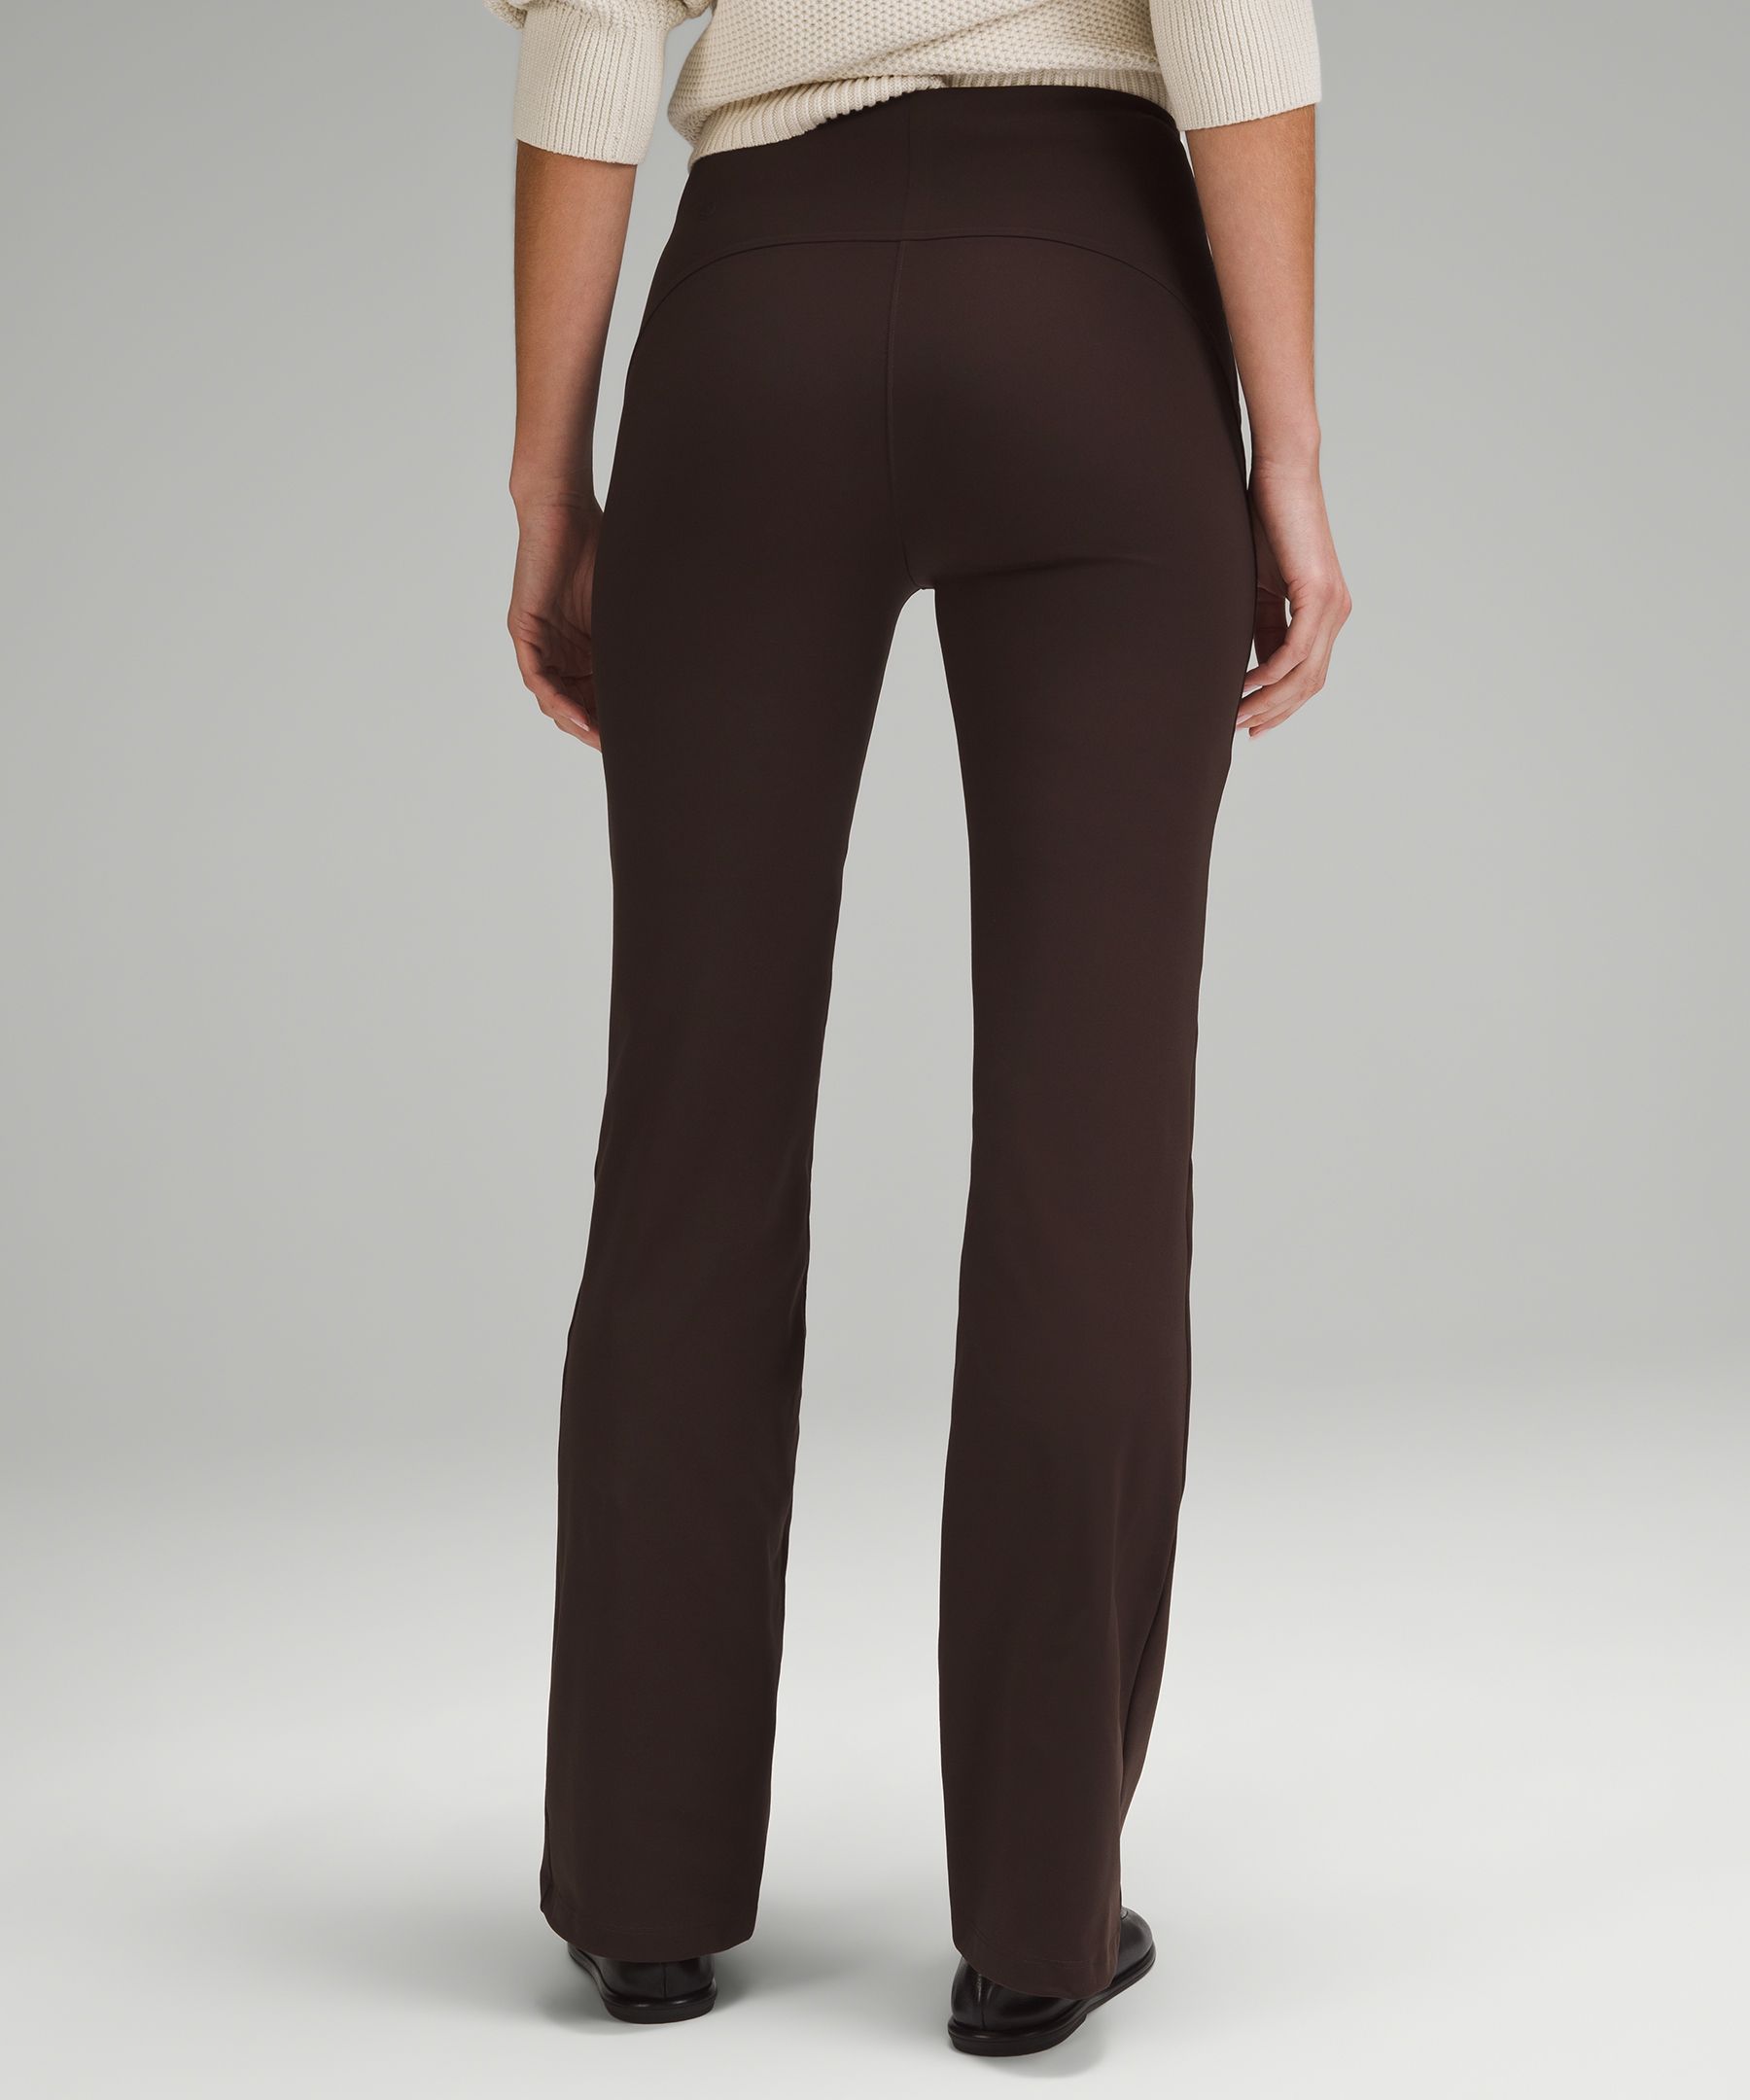 Lululemon athletica Smooth Fit Pull-On High-Rise Pant *Tall, Women's Pants